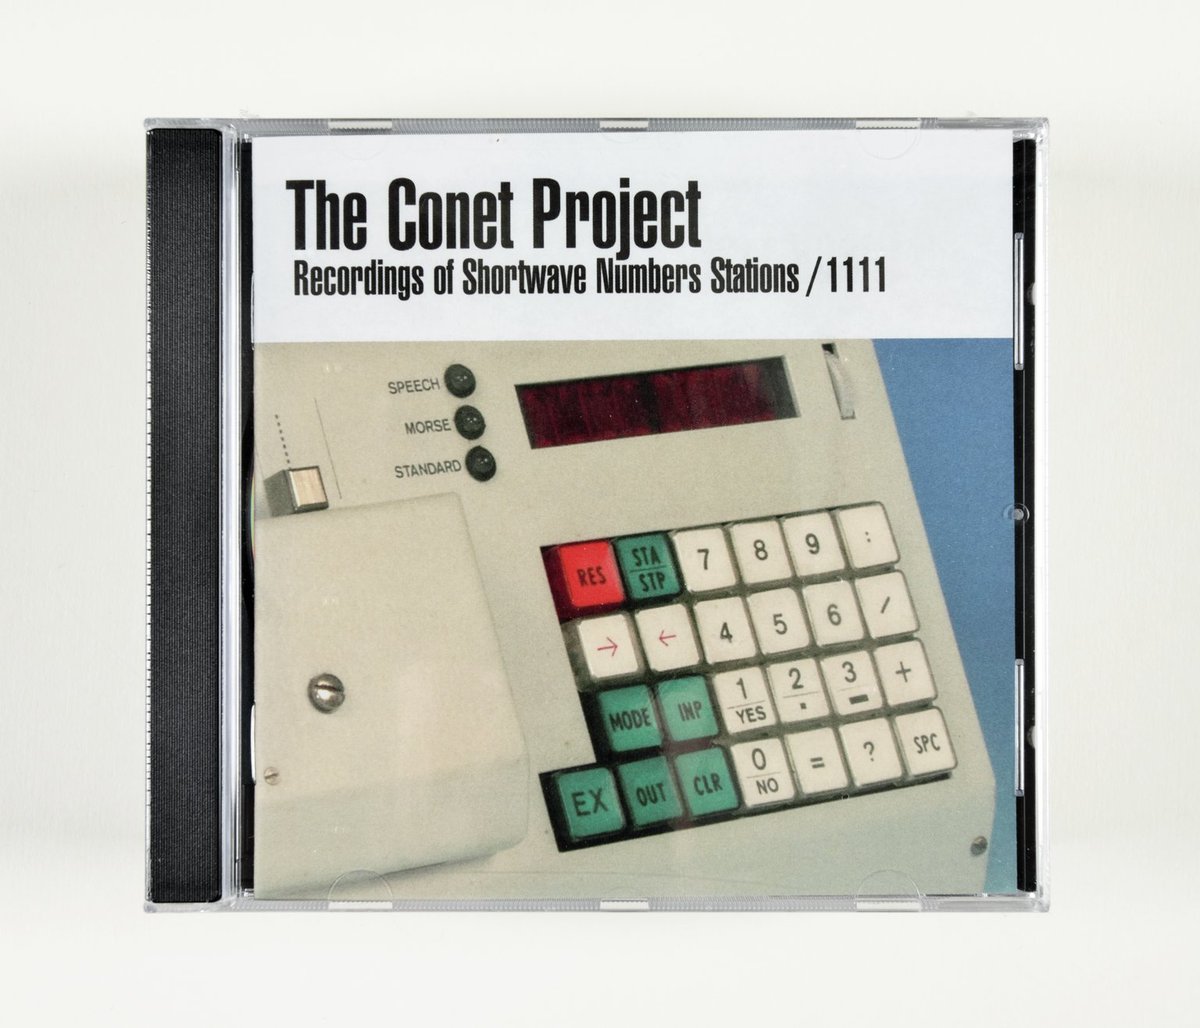 Perhaps the oddest object in the collection is this set of CDs from The Conet Project. These are recordings of ‘numbers stations’ – mysterious short-wave radio broadcasts which contain lists of numbers, occasionally interrupted by short bursts of music.